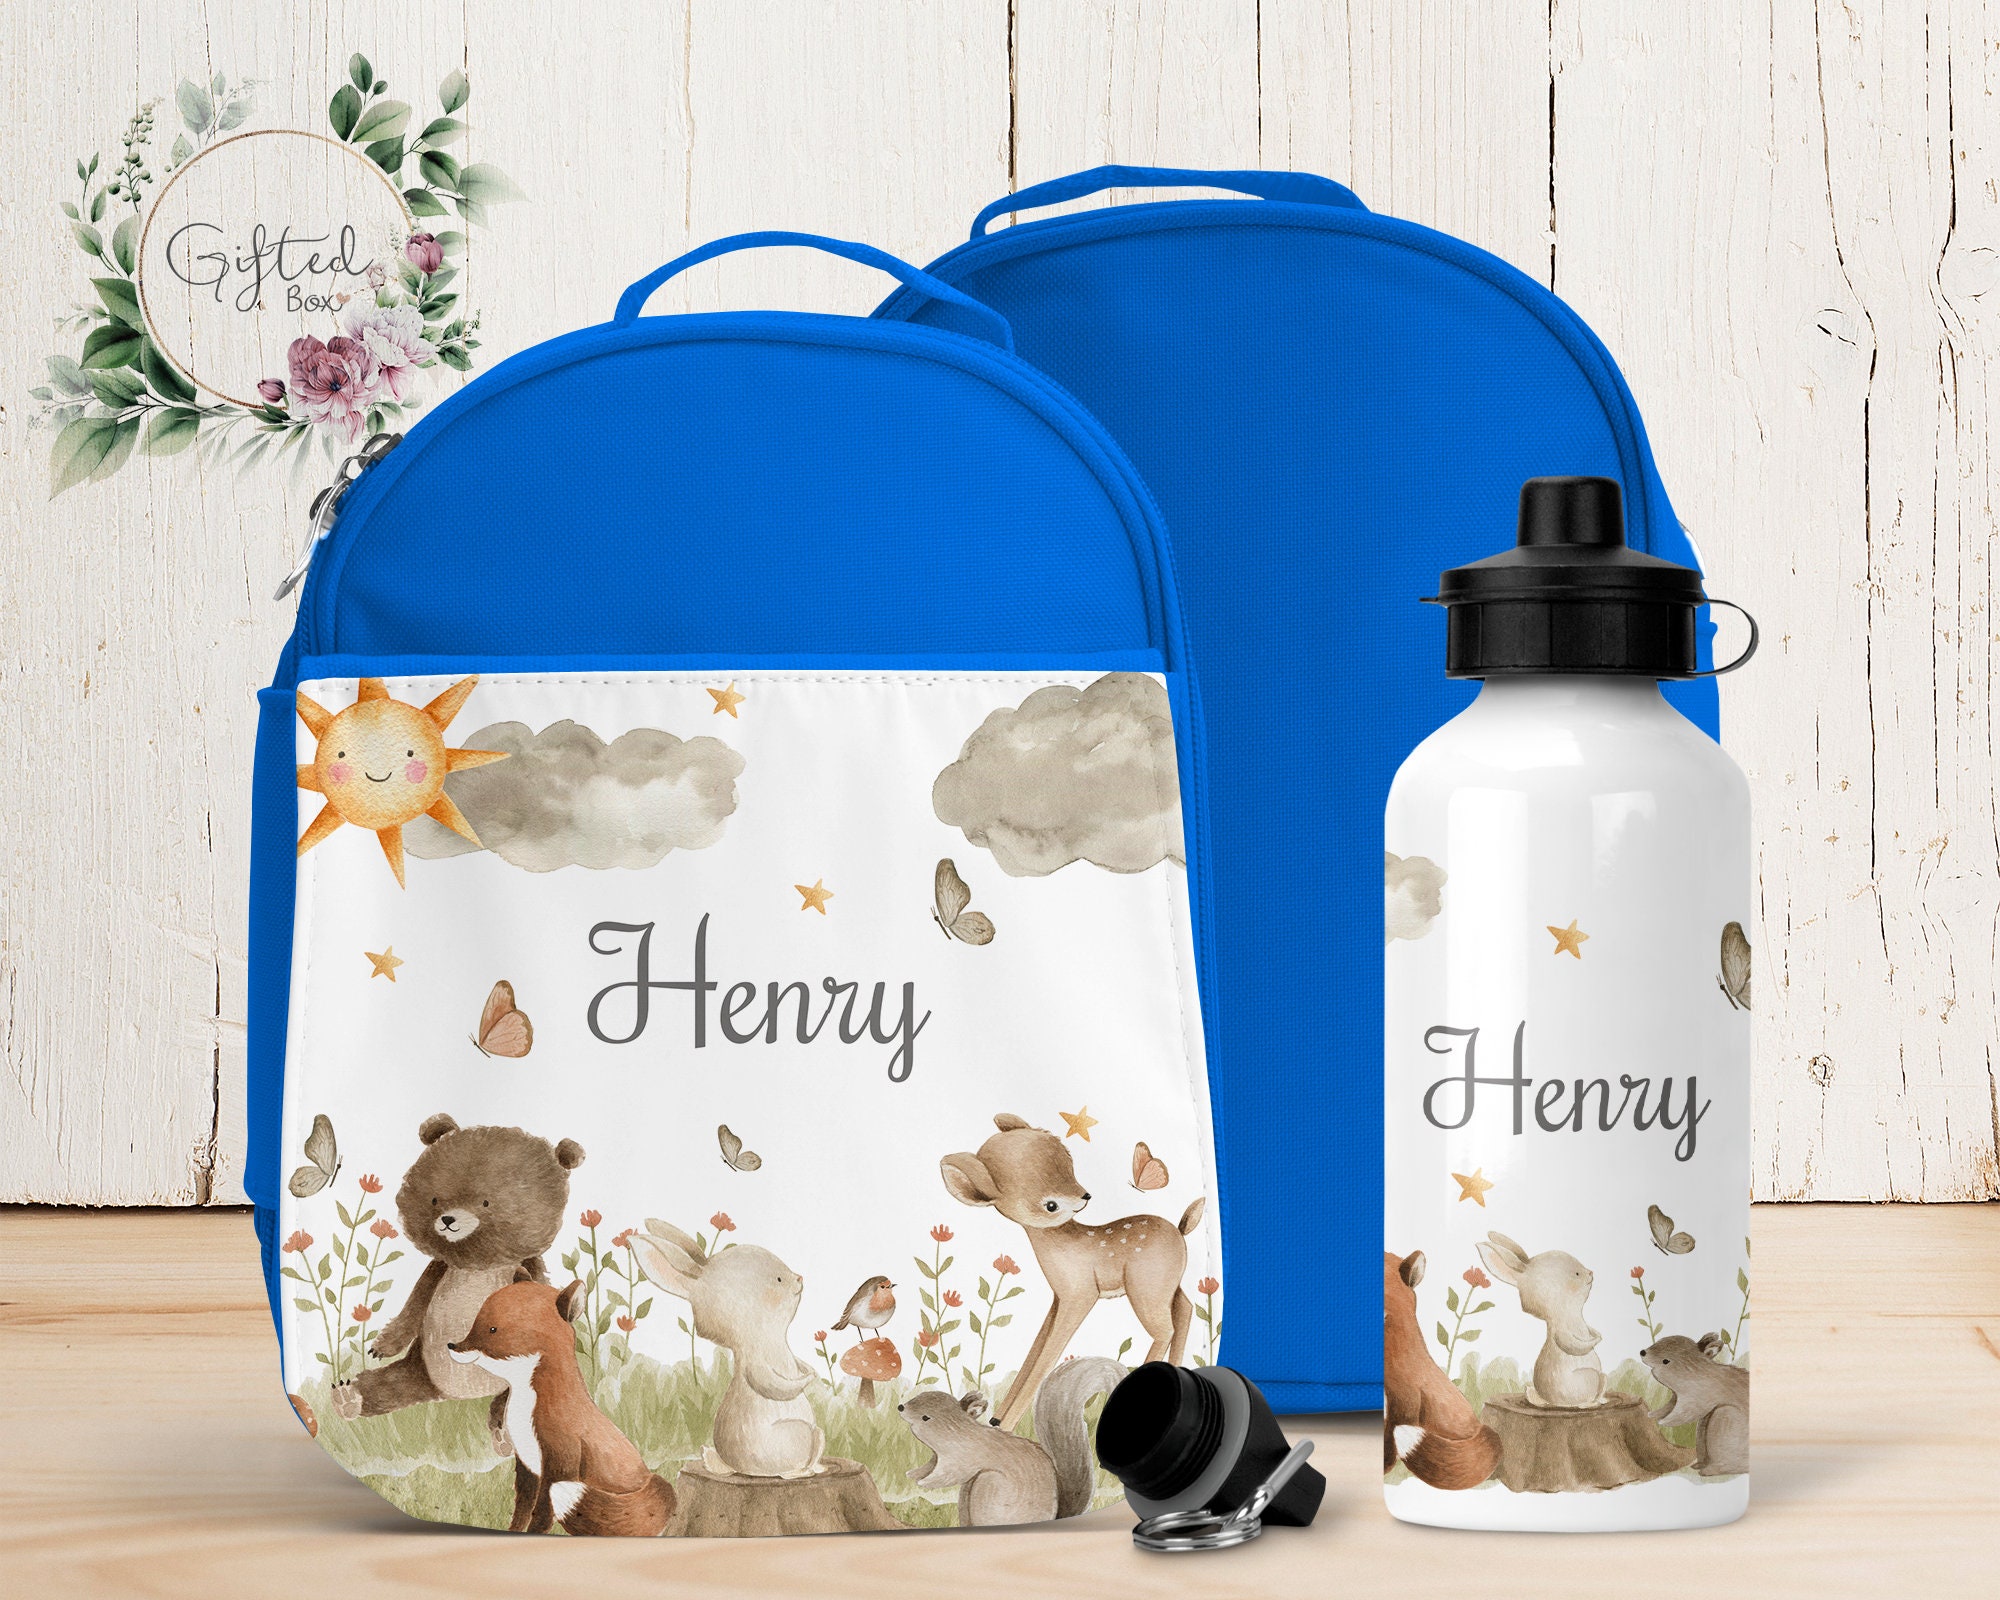 Kids Back to School Lunch Bag Matching Water Bottle -  Norway